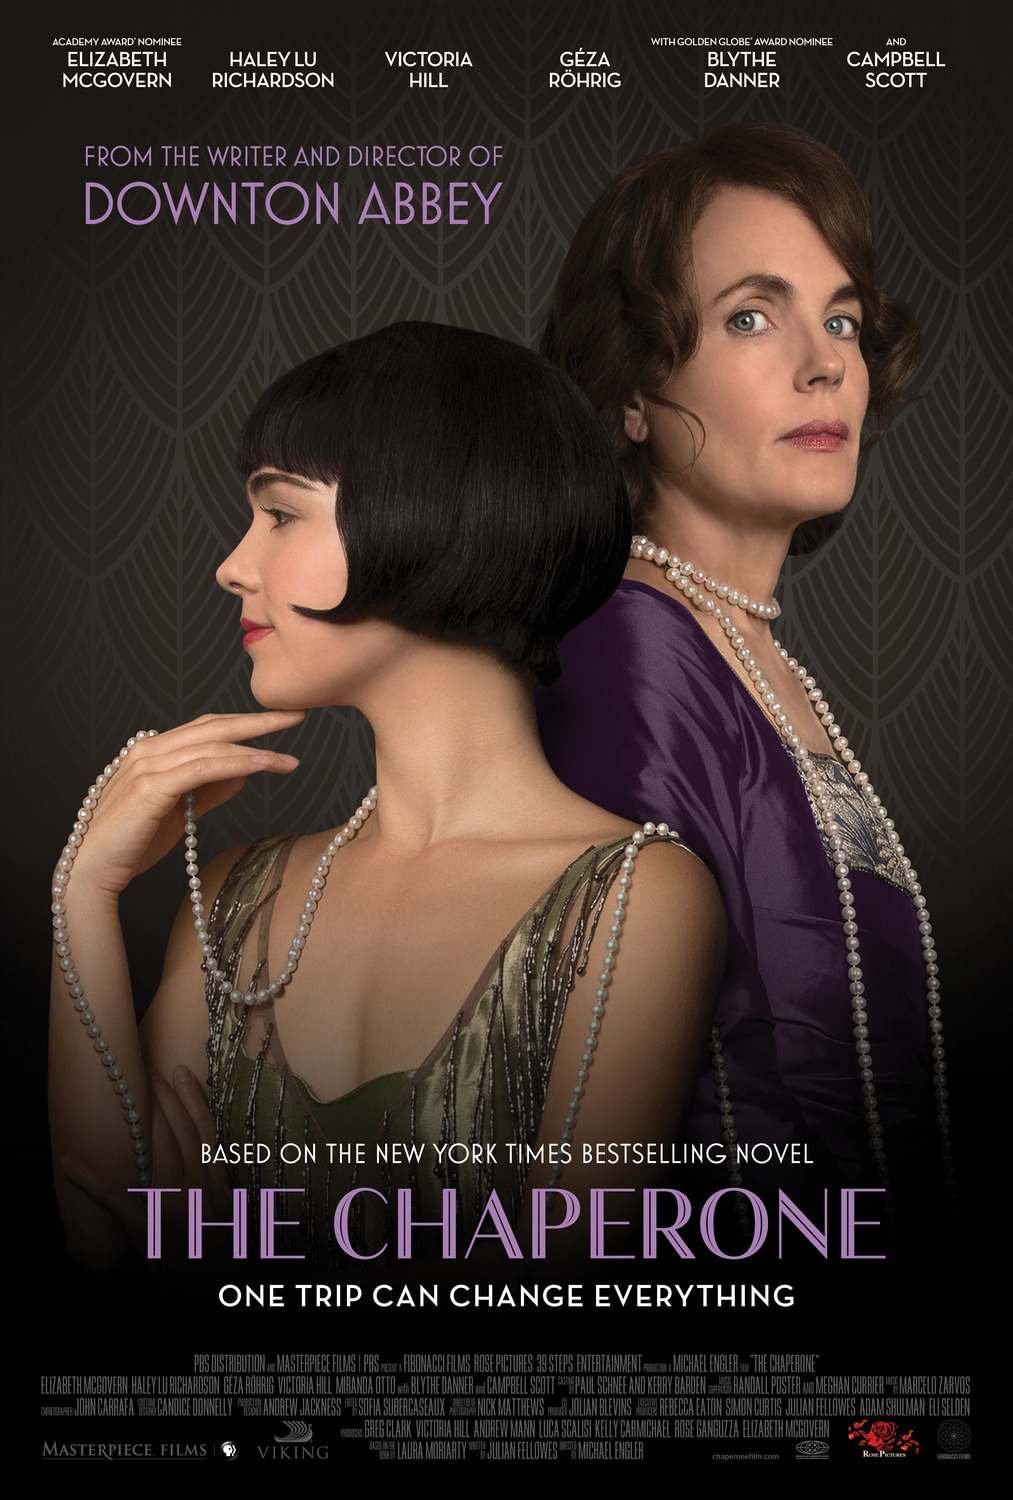 "The Chaperone" movie poster